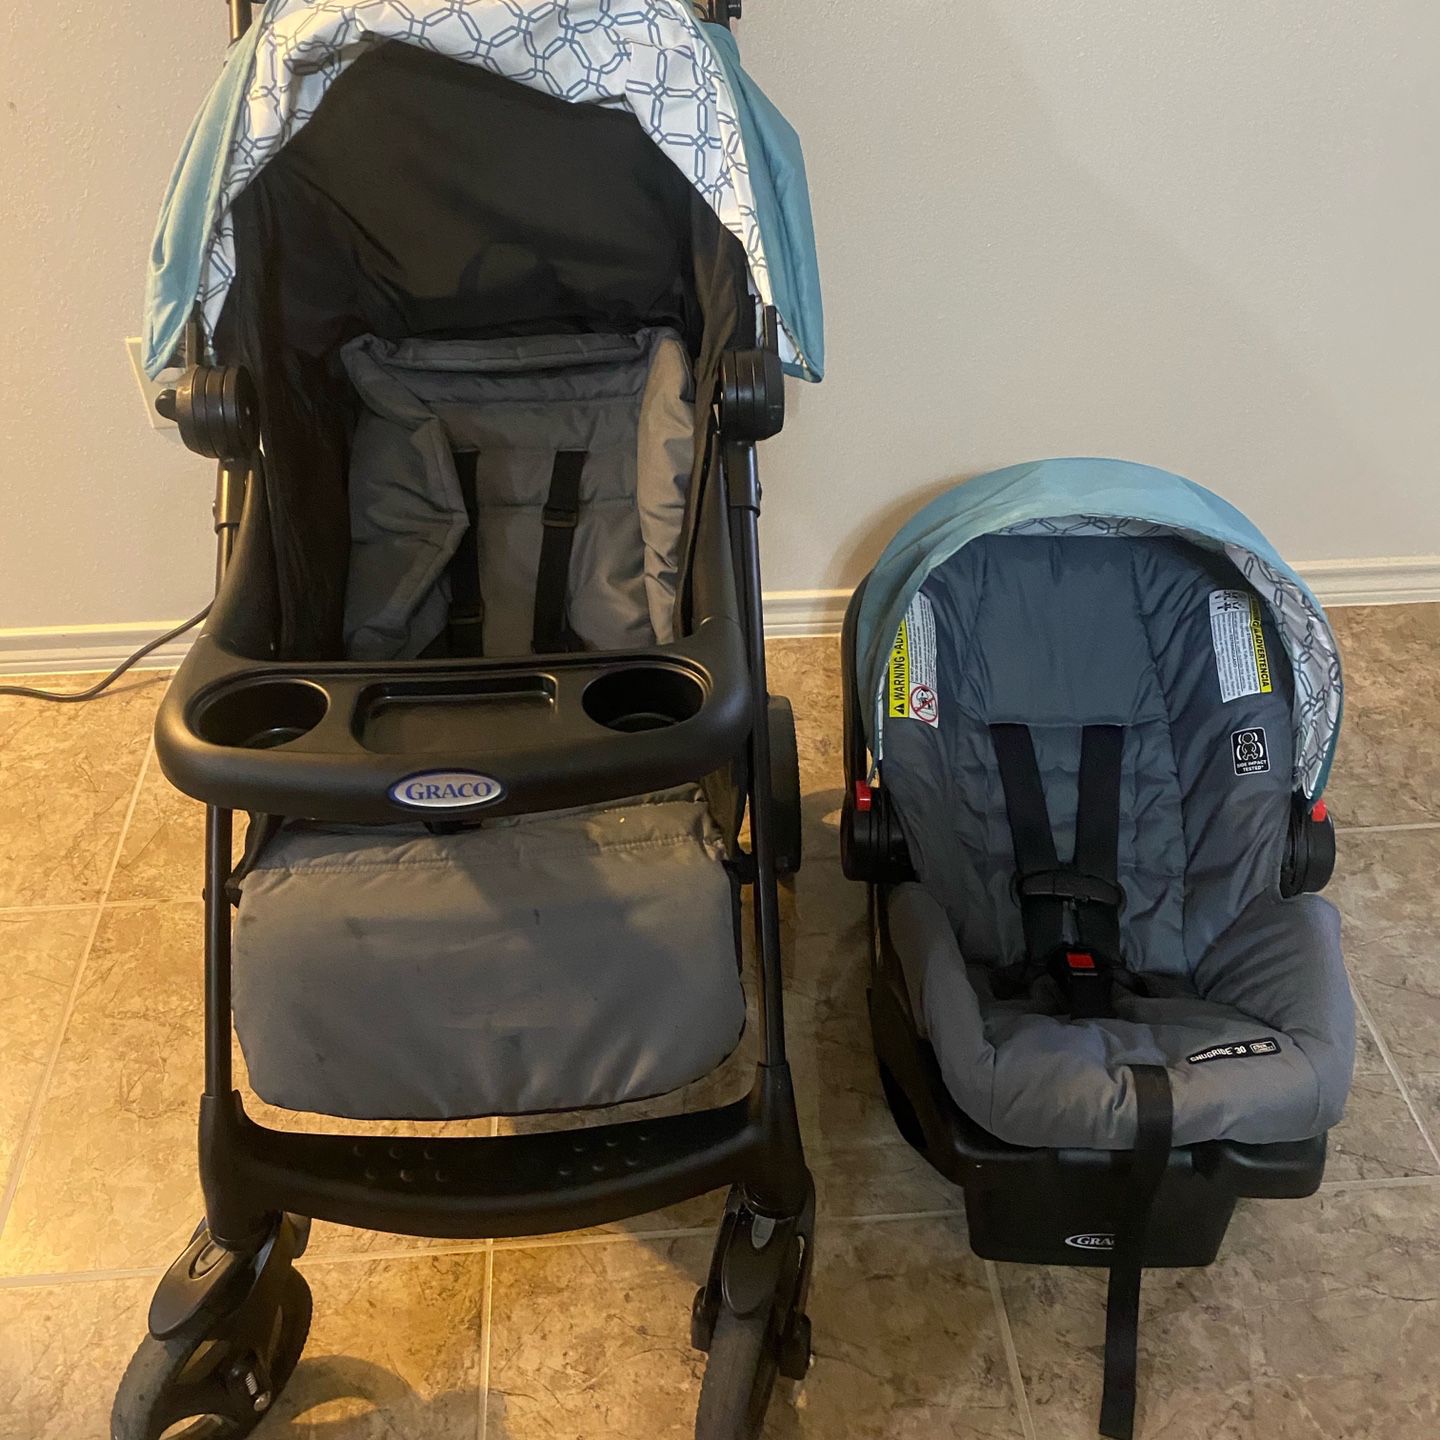 Graco Verb Click Connect Travel System with SnugRide30 Infant Car Seat